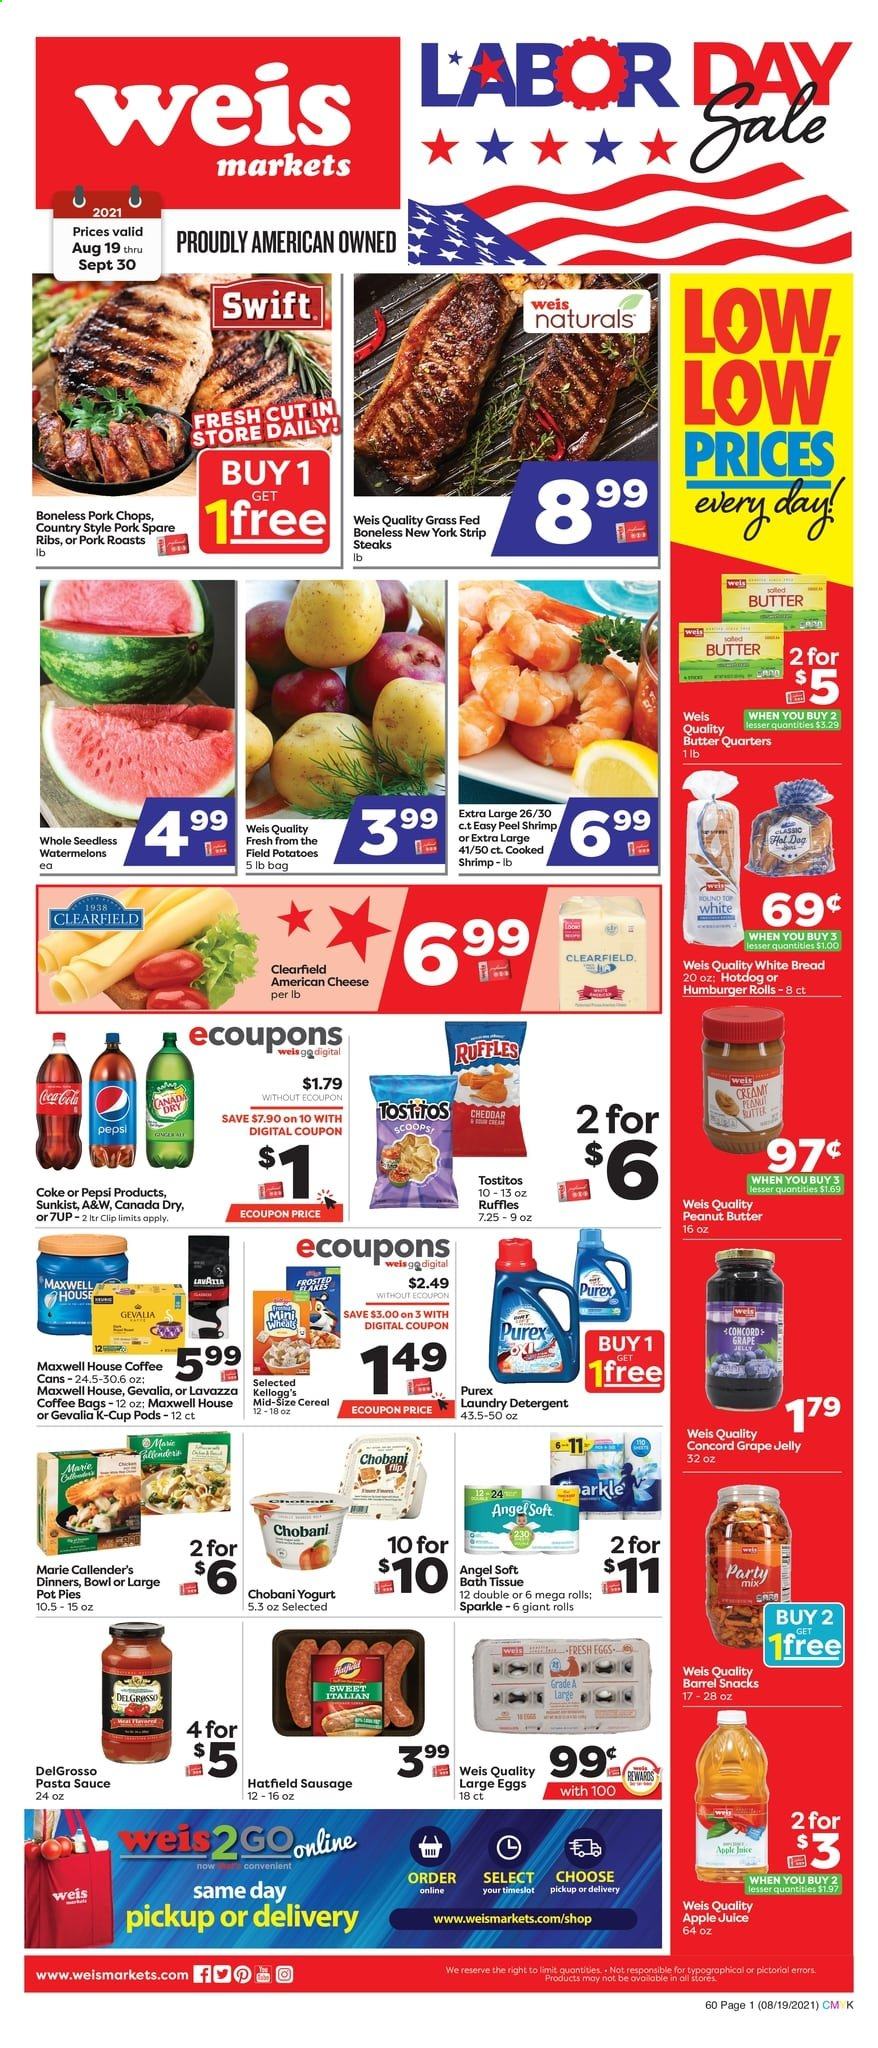 thumbnail - Weis Flyer - 08/19/2021 - 09/30/2021 - Sales products - bread, white bread, hot dog rolls, pot pie, potatoes, beef meat, steak, striploin steak, pork chops, pork meat, pork ribs, pork spare ribs, shrimps, hot dog, pasta sauce, sauce, Marie Callender's, sausage, american cheese, cheese, yoghurt, Chobani, large eggs, snack, jelly, Kellogg's, Ruffles, Tostitos, cereals, grape jelly, peanut butter, apple juice, Canada Dry, Coca-Cola, Pepsi, juice, 7UP, A&W, Maxwell House, coffee, coffee capsules, K-Cups, Gevalia, Lavazza, bath tissue, detergent, laundry detergent, Purex, bowl. Page 1.